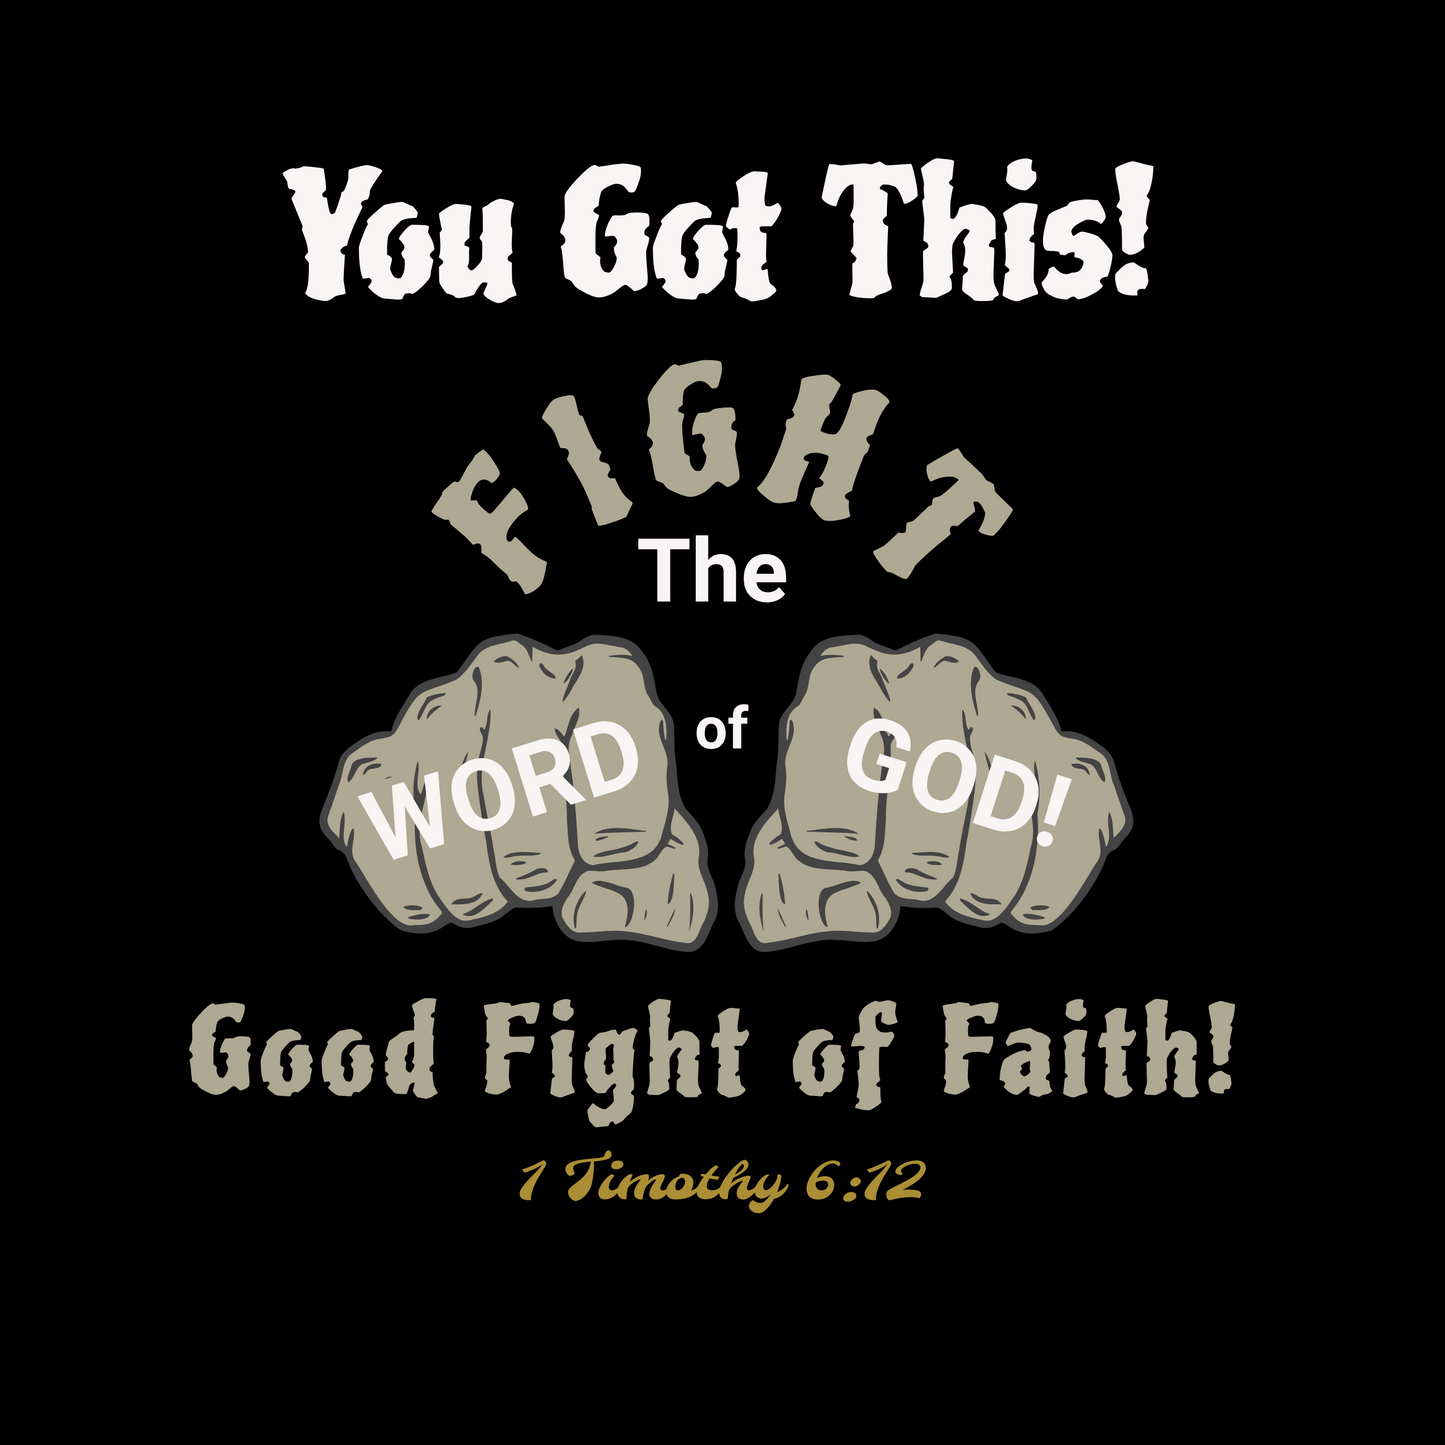 Unisex - You Got This! - Fight The Good Fight of Faith - Word of God - 1 Timothy 6:12